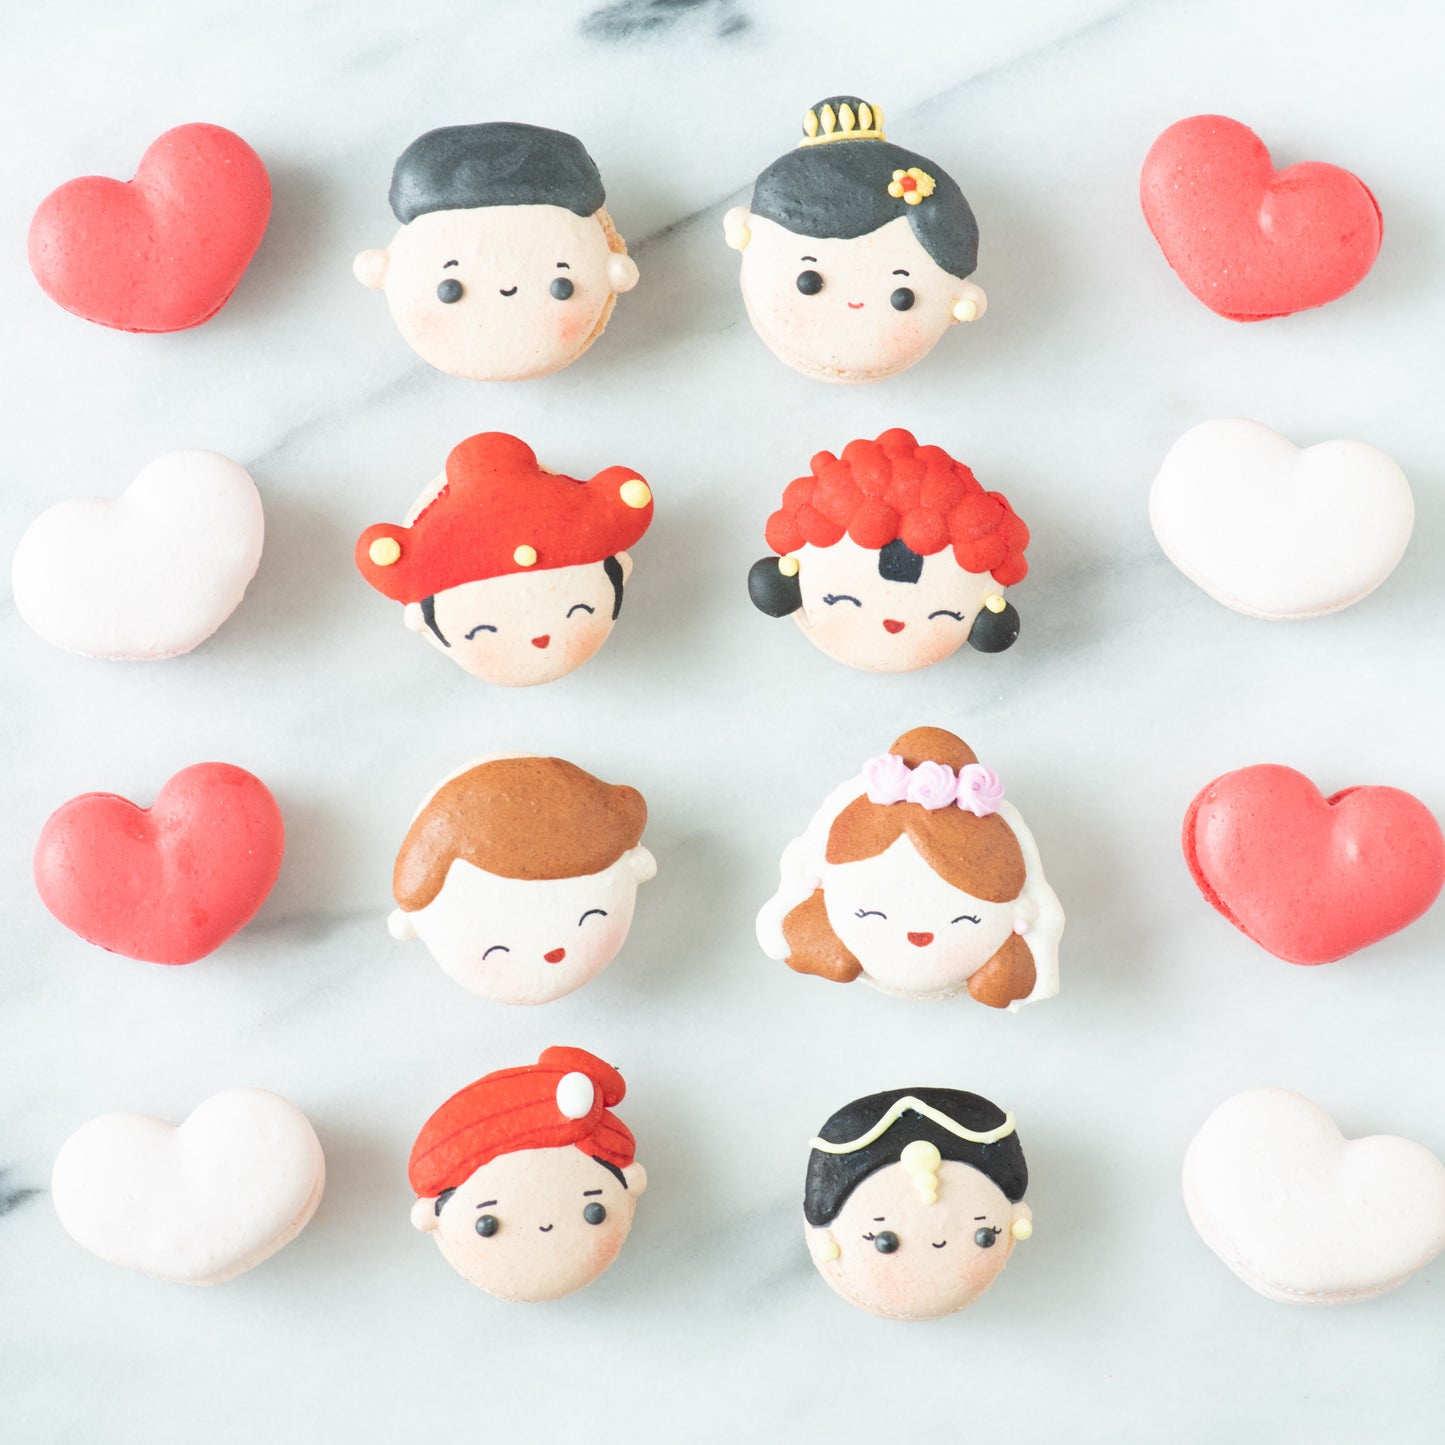 10 pcs Traditional Chinese Wedding Couple Macarons in a Gift Box | Complimentary Ribbon and Personalised Message | $38.80 Nett